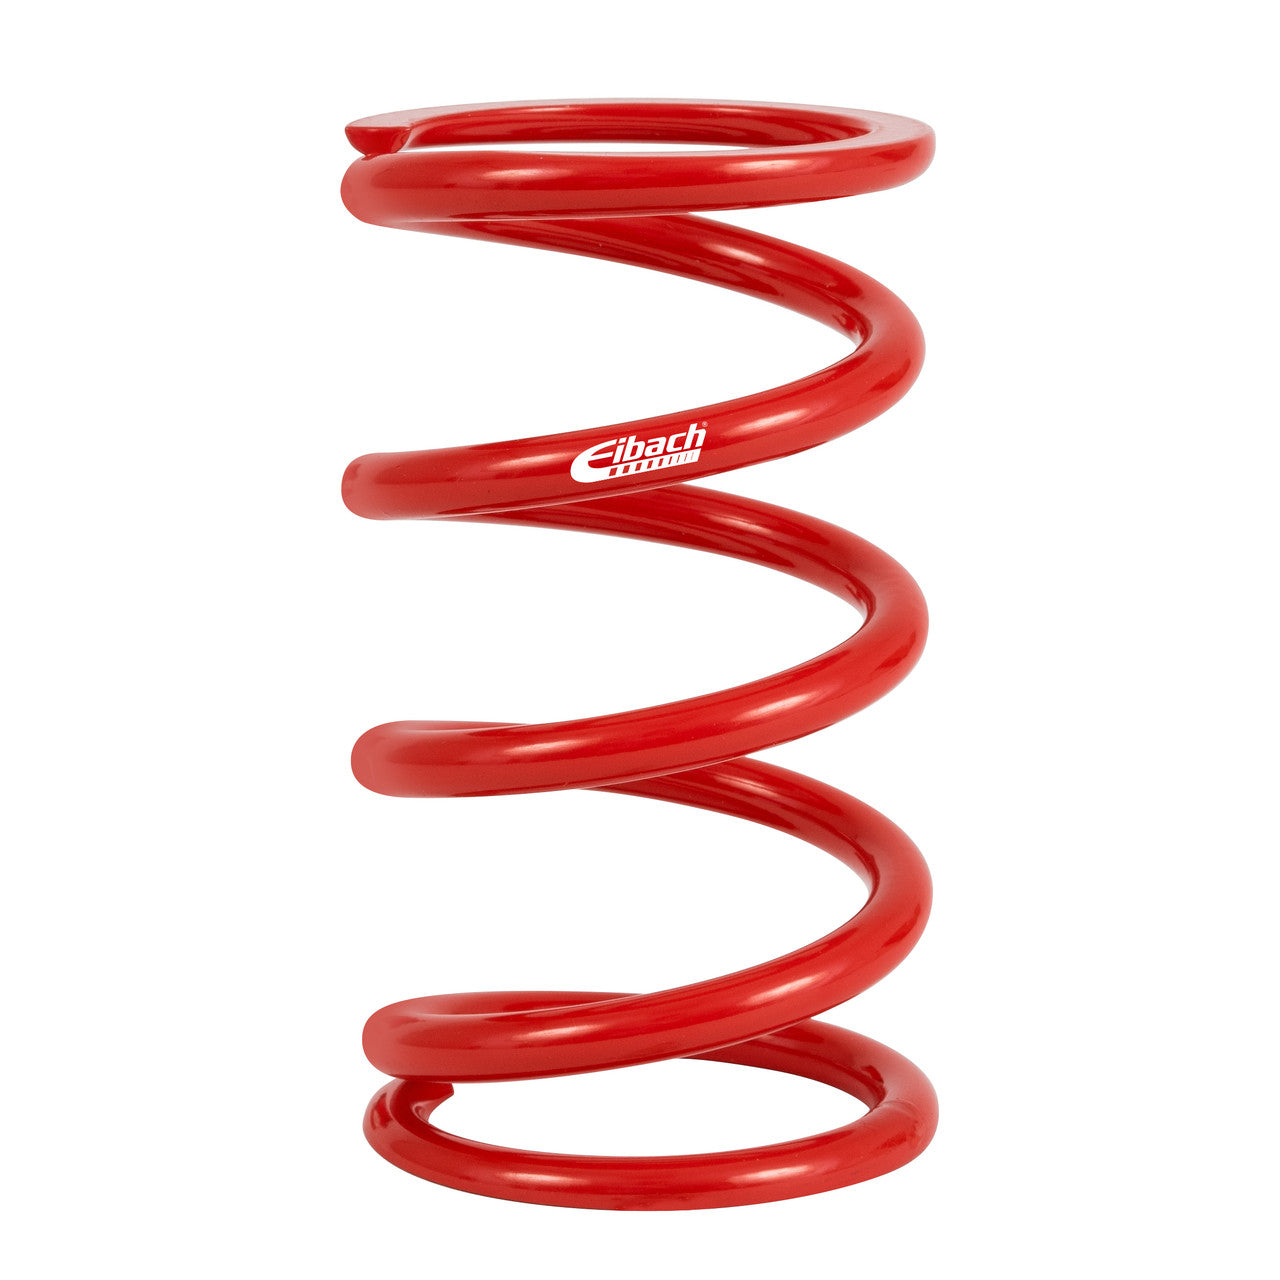 Eibach Metric Coilover Spring - 60MM I.D. 140-60-0050